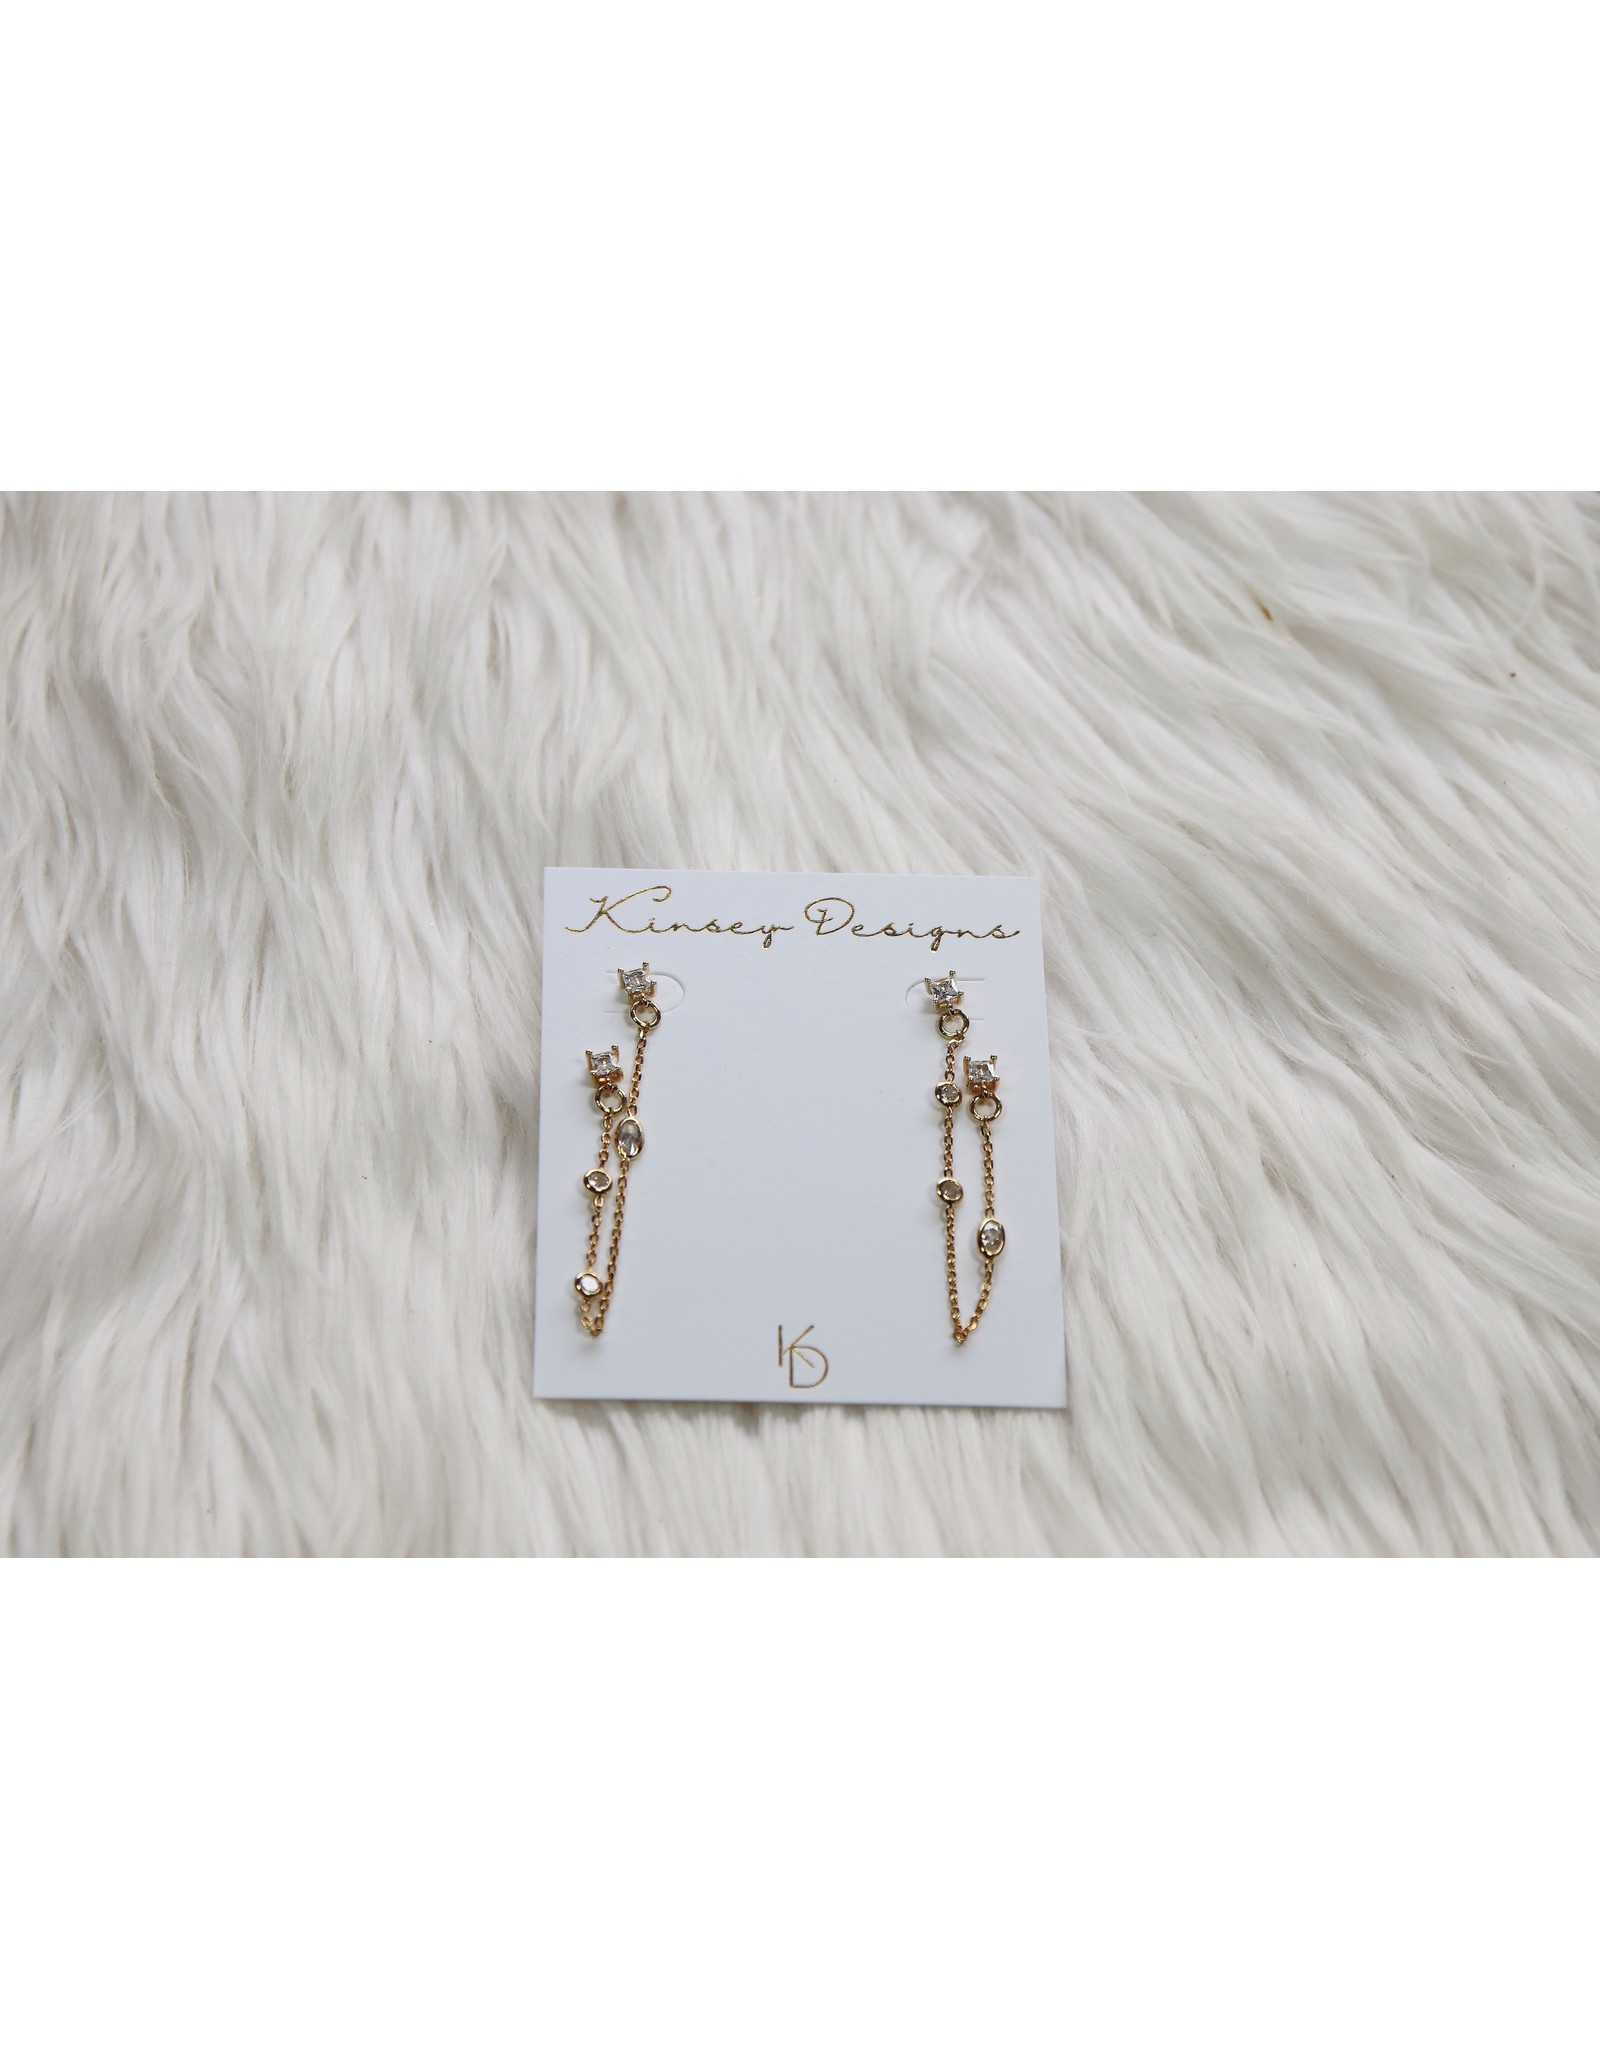 KINSEY DESIGNS CLEO DOUBLE POST EARRING (NF)